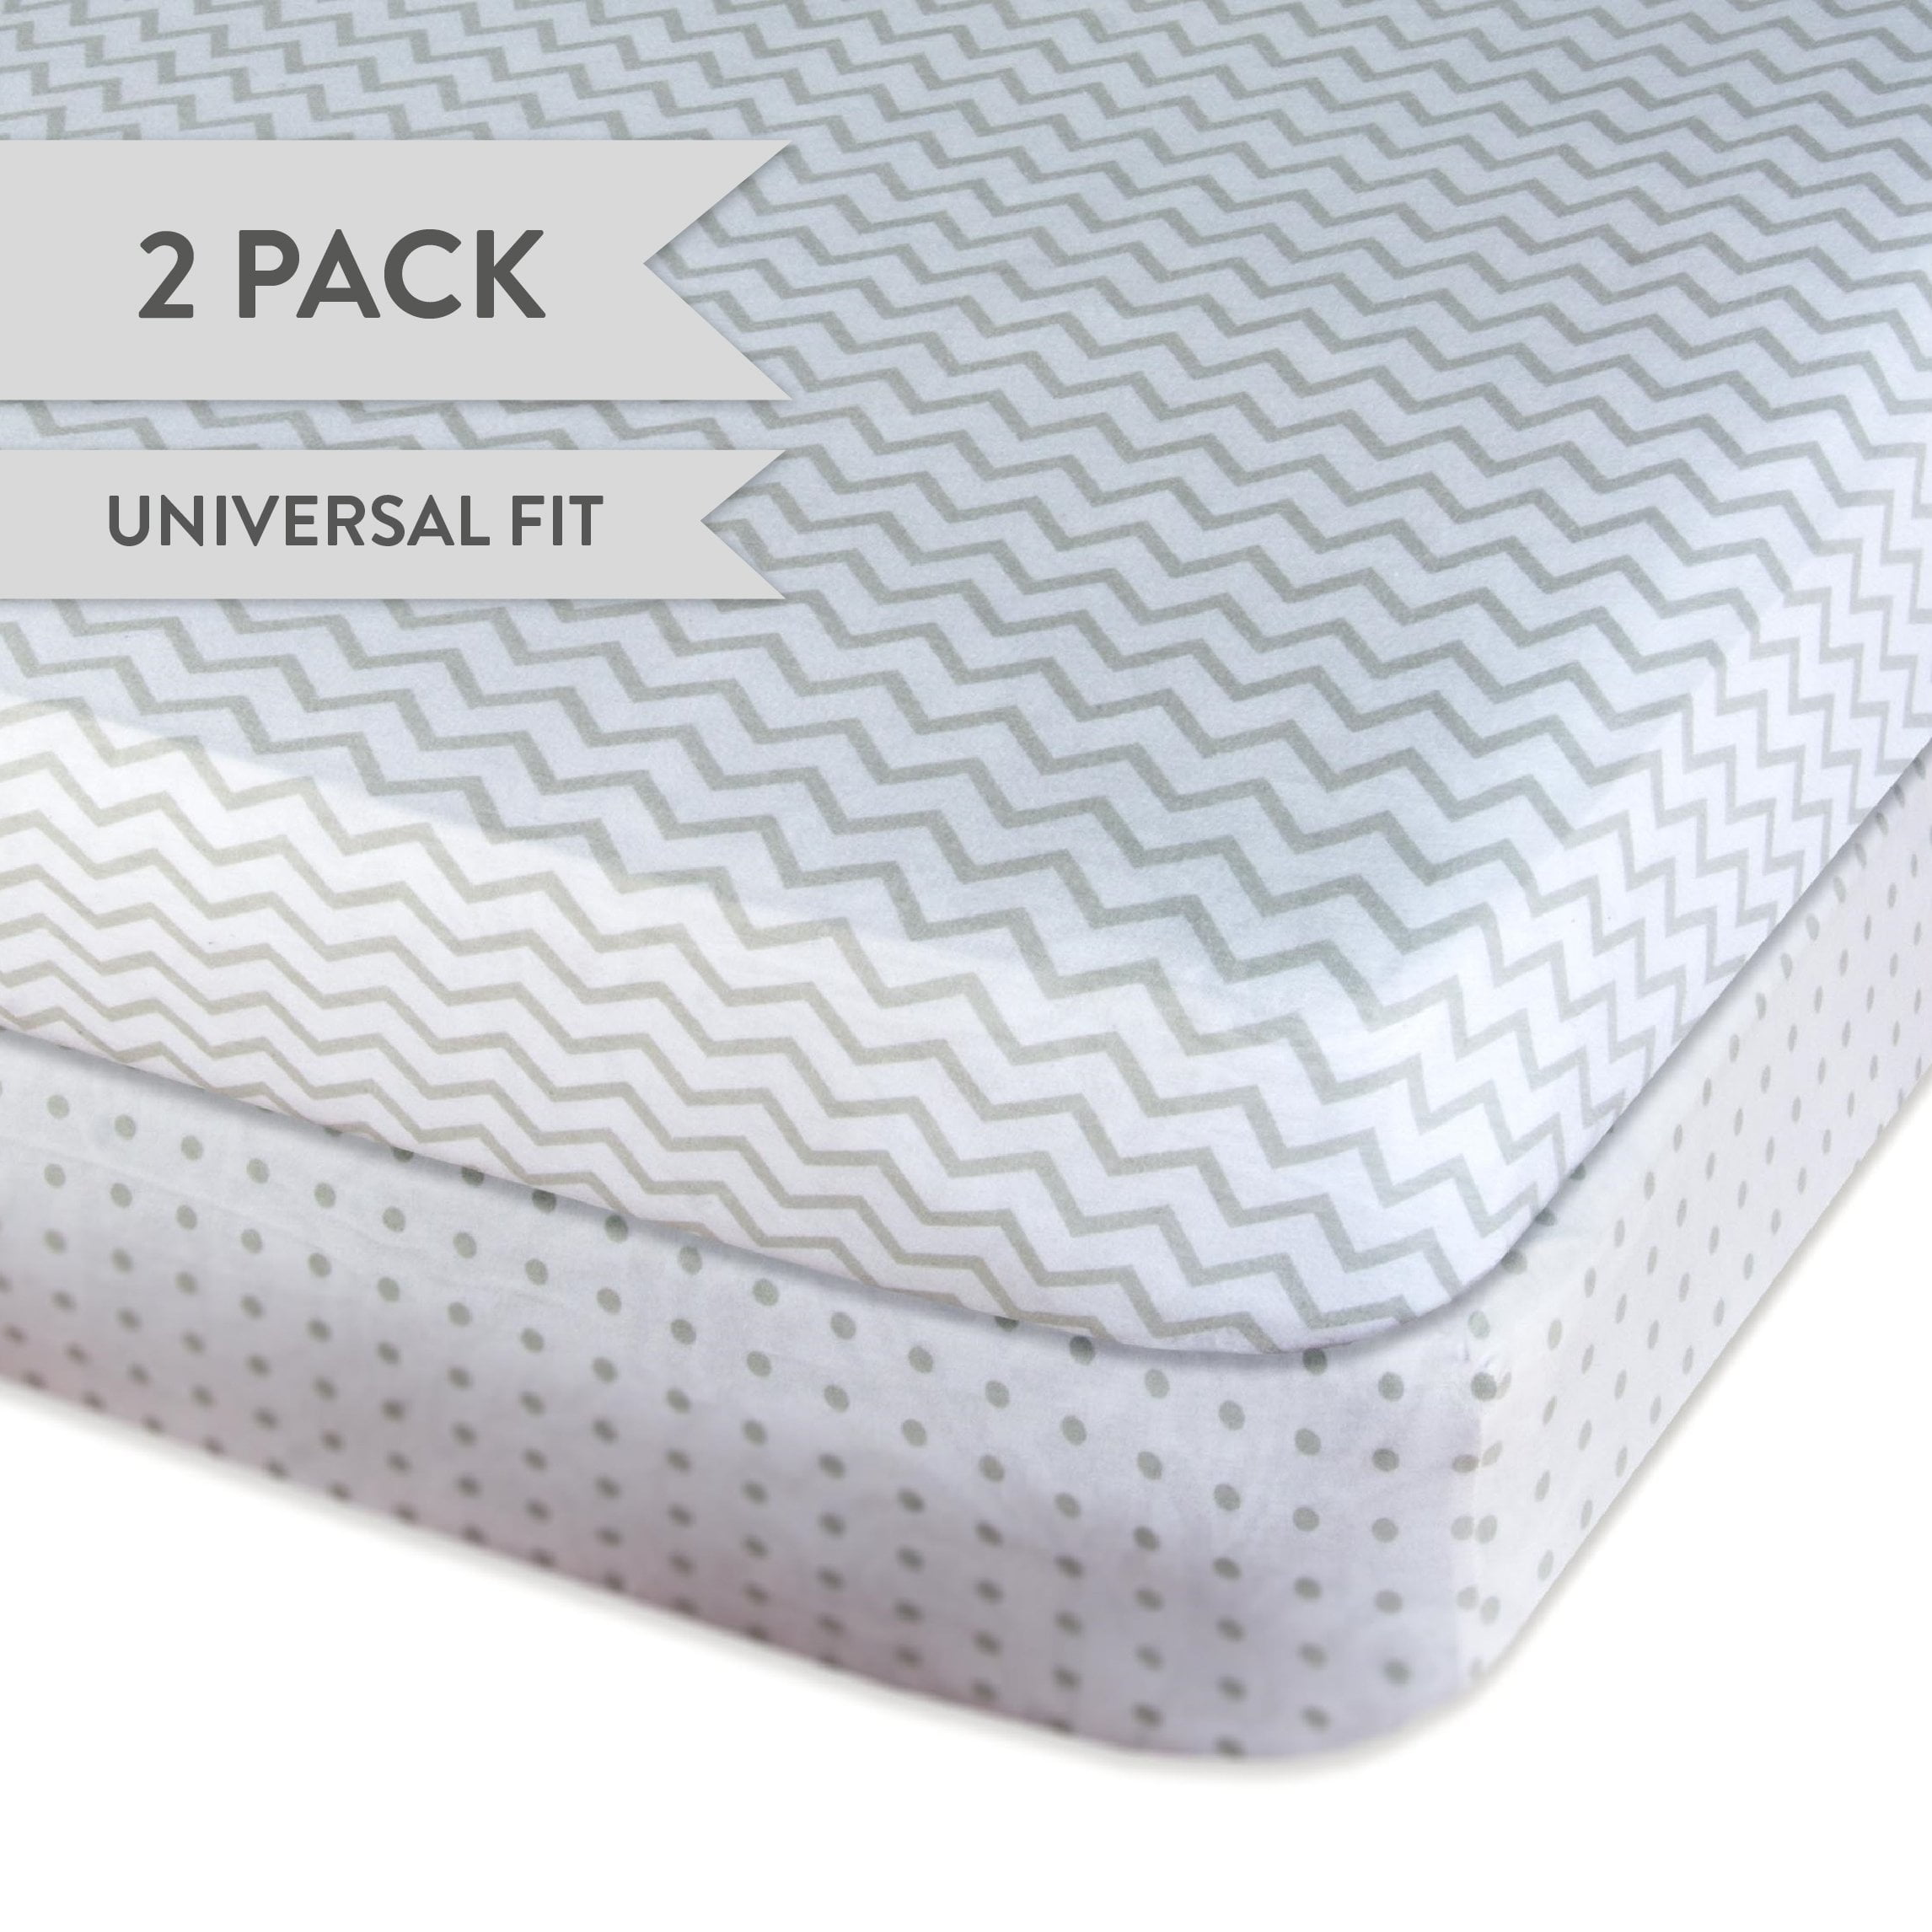 Grey Chevron and Polka Dot Pack N Play Portable Crib Sheet Set 100% Jersey Cotton Unisex for Baby Girl and Baby Boy by Elys & Co. 